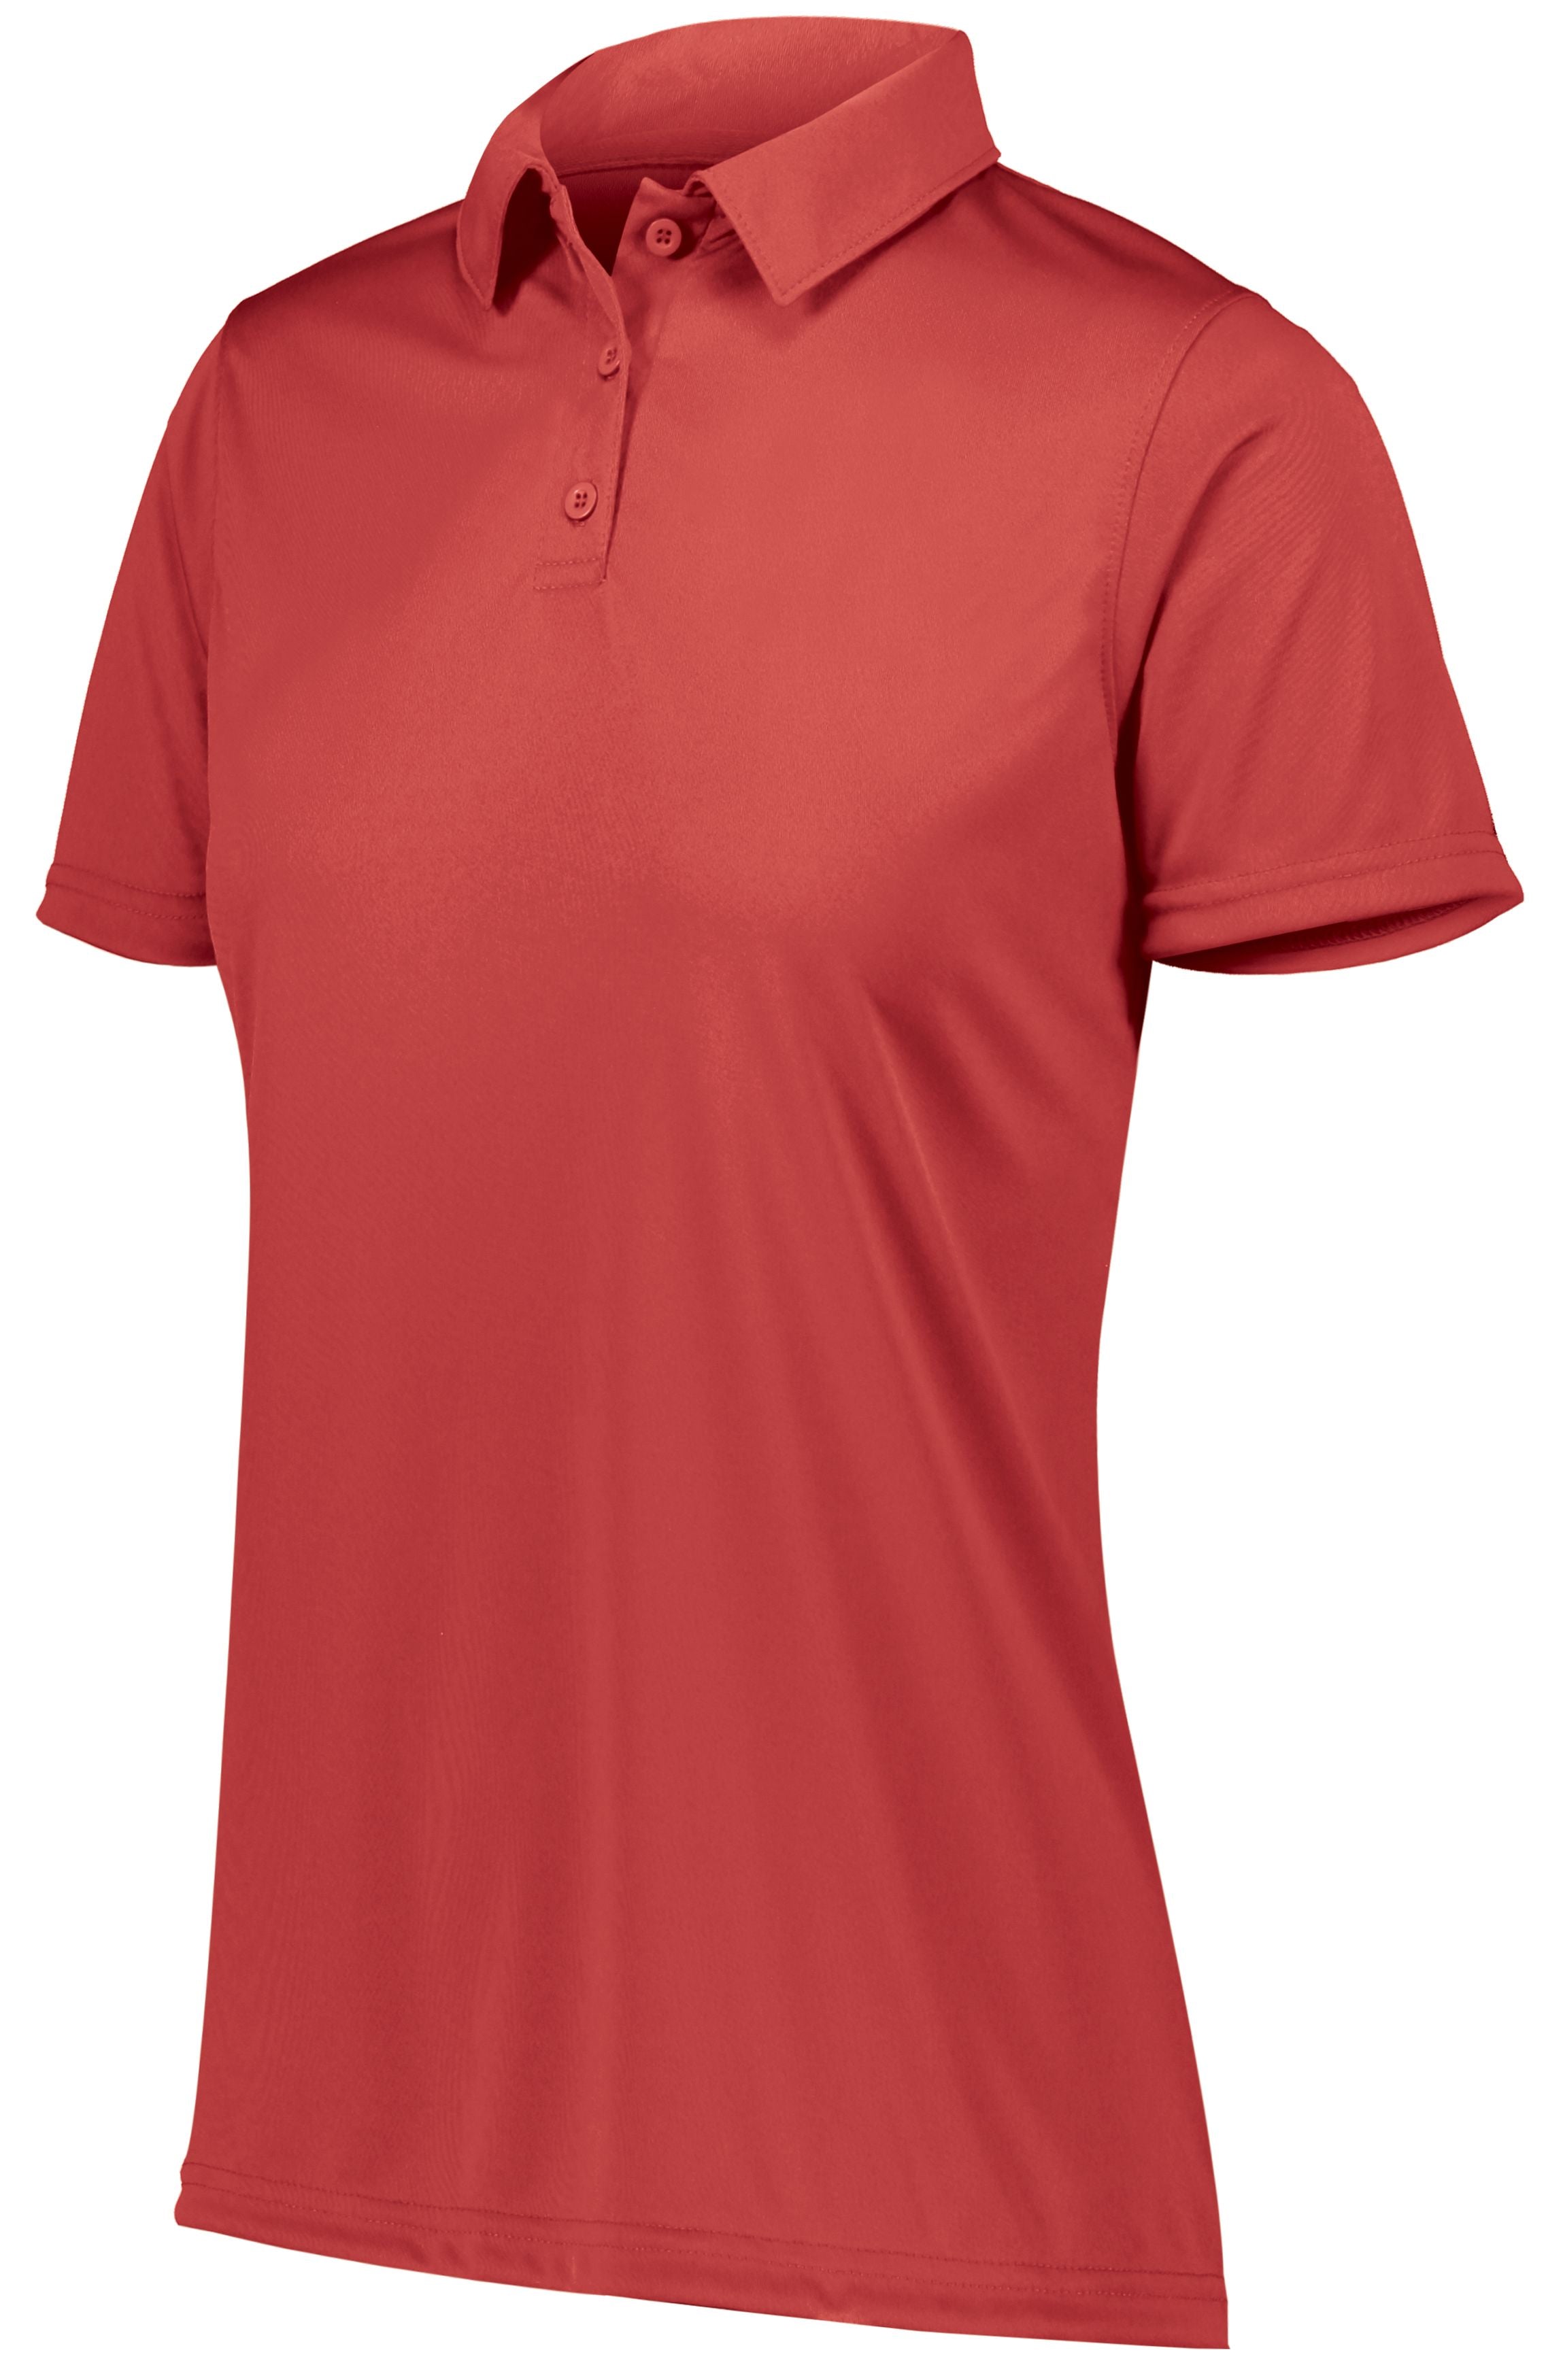 Augusta Sportswear Ladies Vital Polo in Red  -Part of the Ladies, Ladies-Polo, Polos, Augusta-Products, Shirts product lines at KanaleyCreations.com